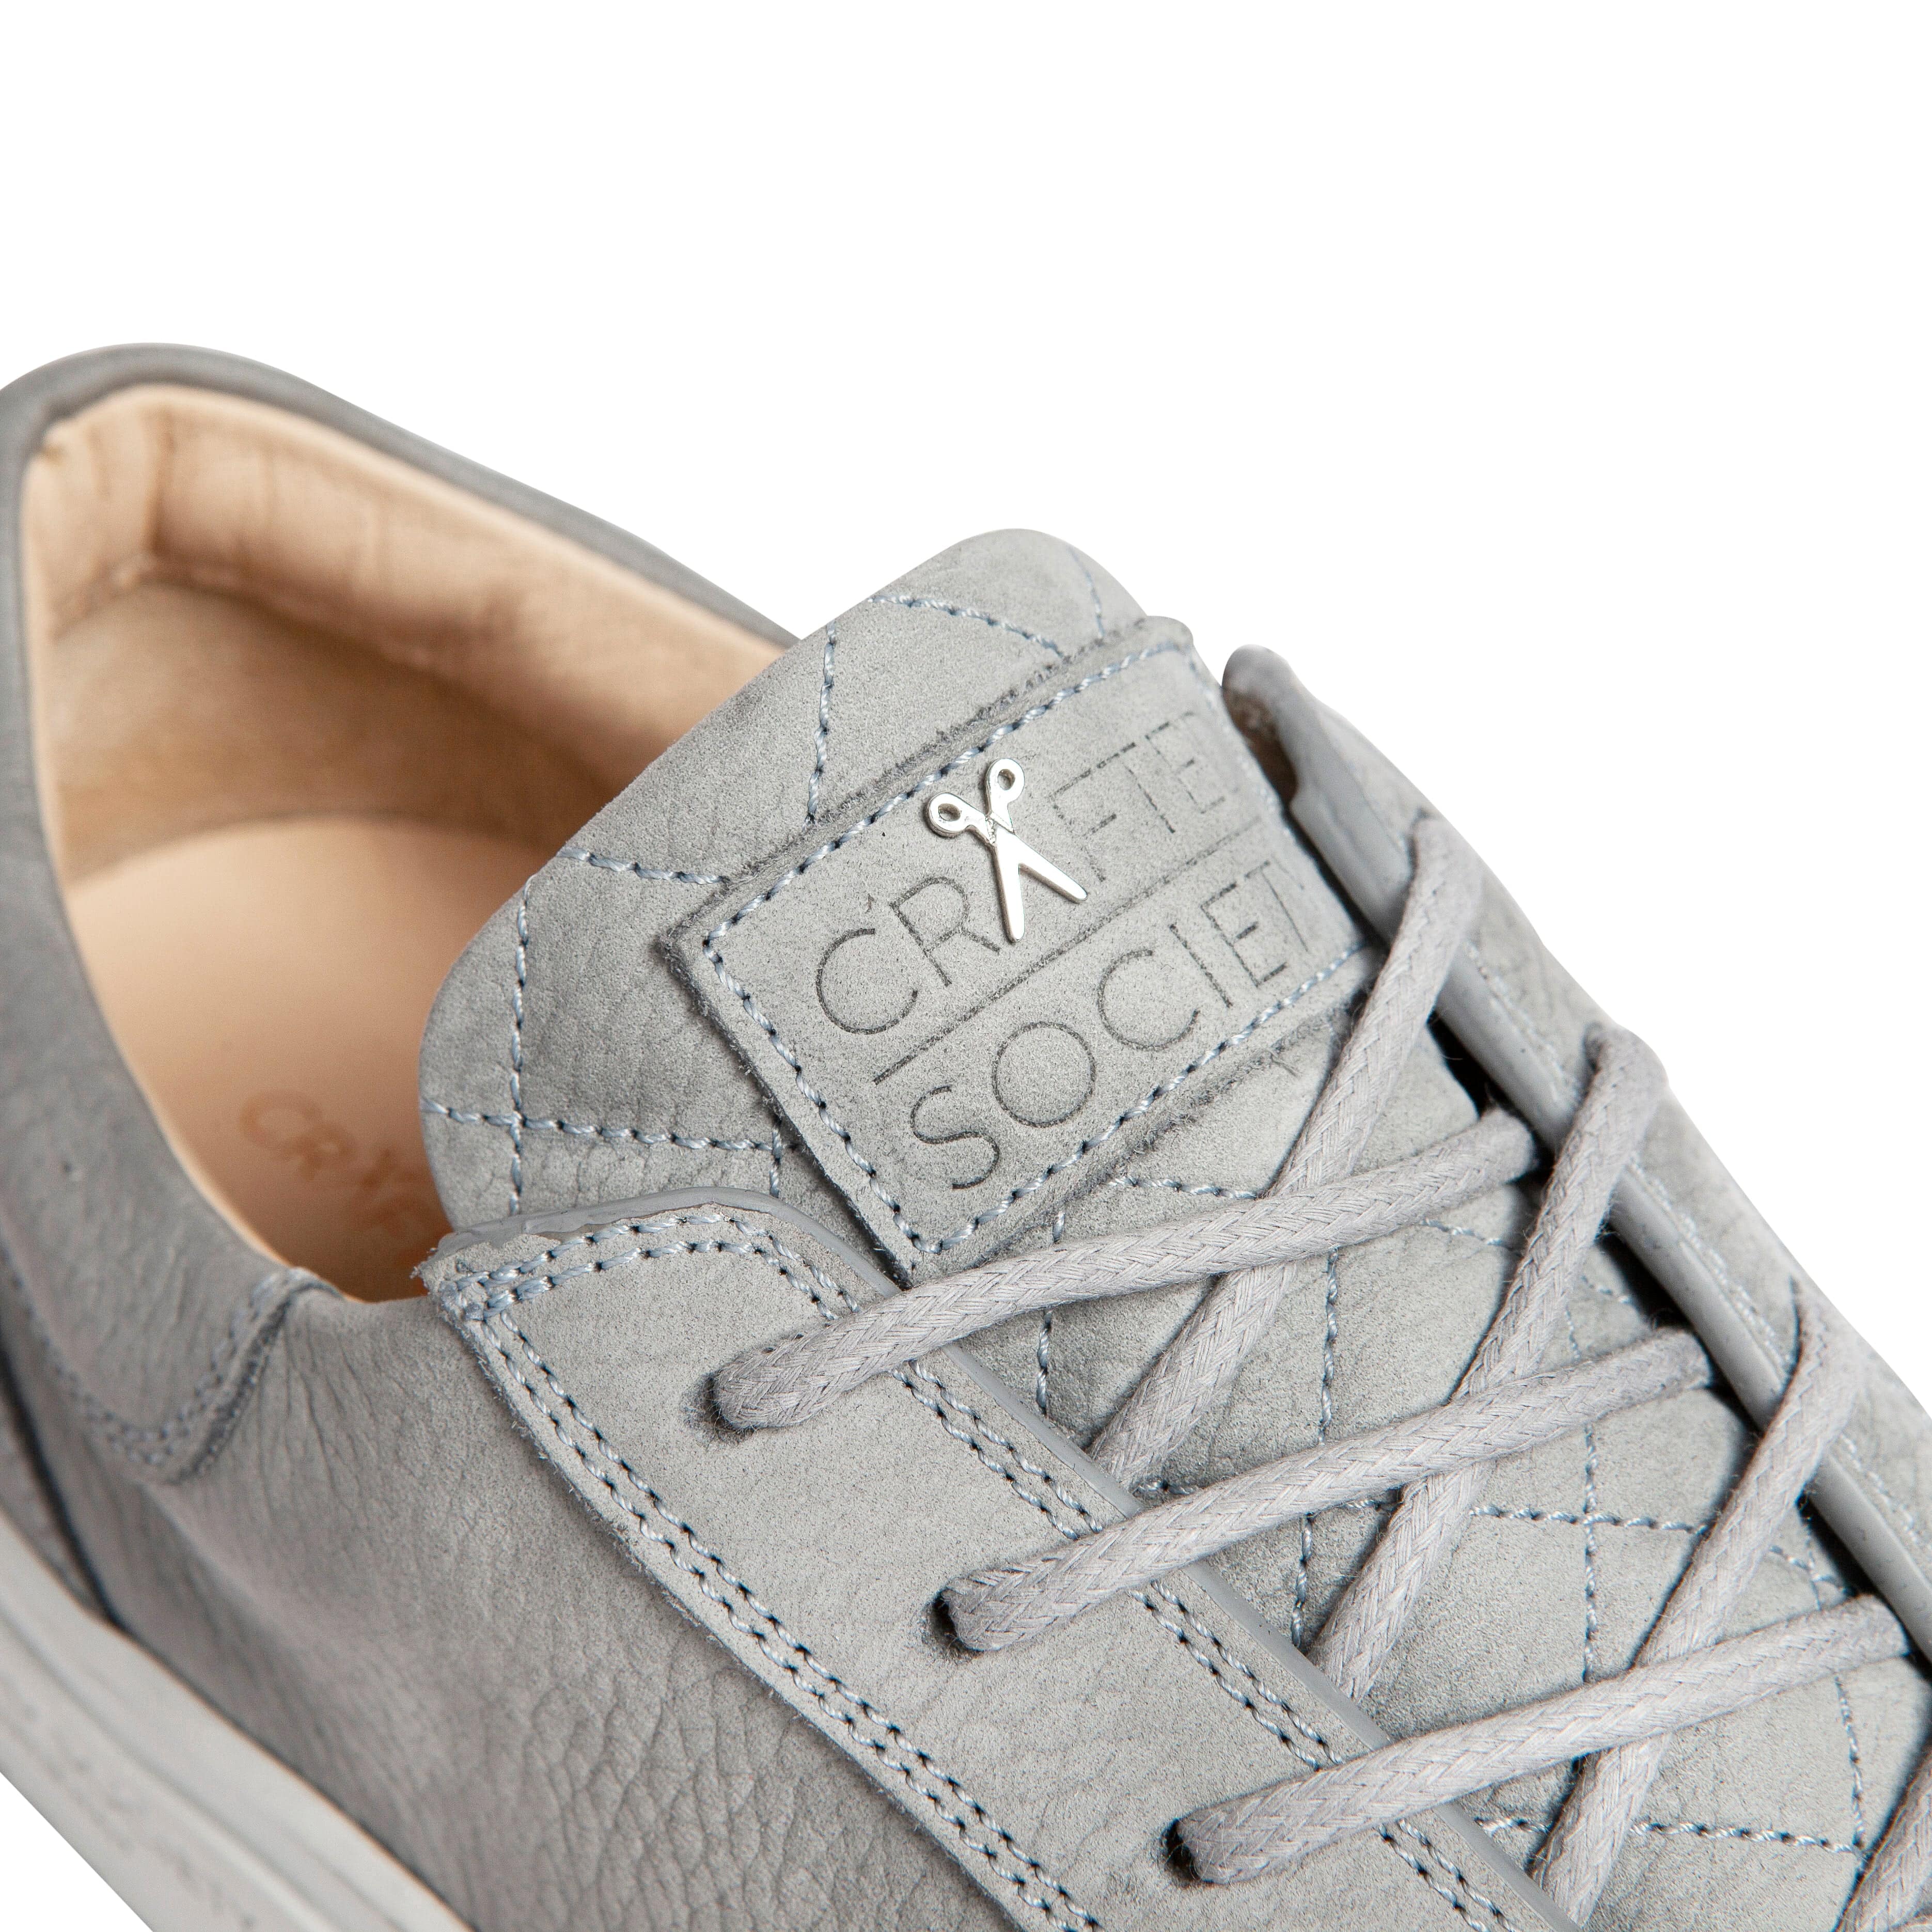 Mario Low Refined Sneaker | Light Grey Nubuck | White Outsole | Made in Italy | Sizes 39, 40, 41 & 42